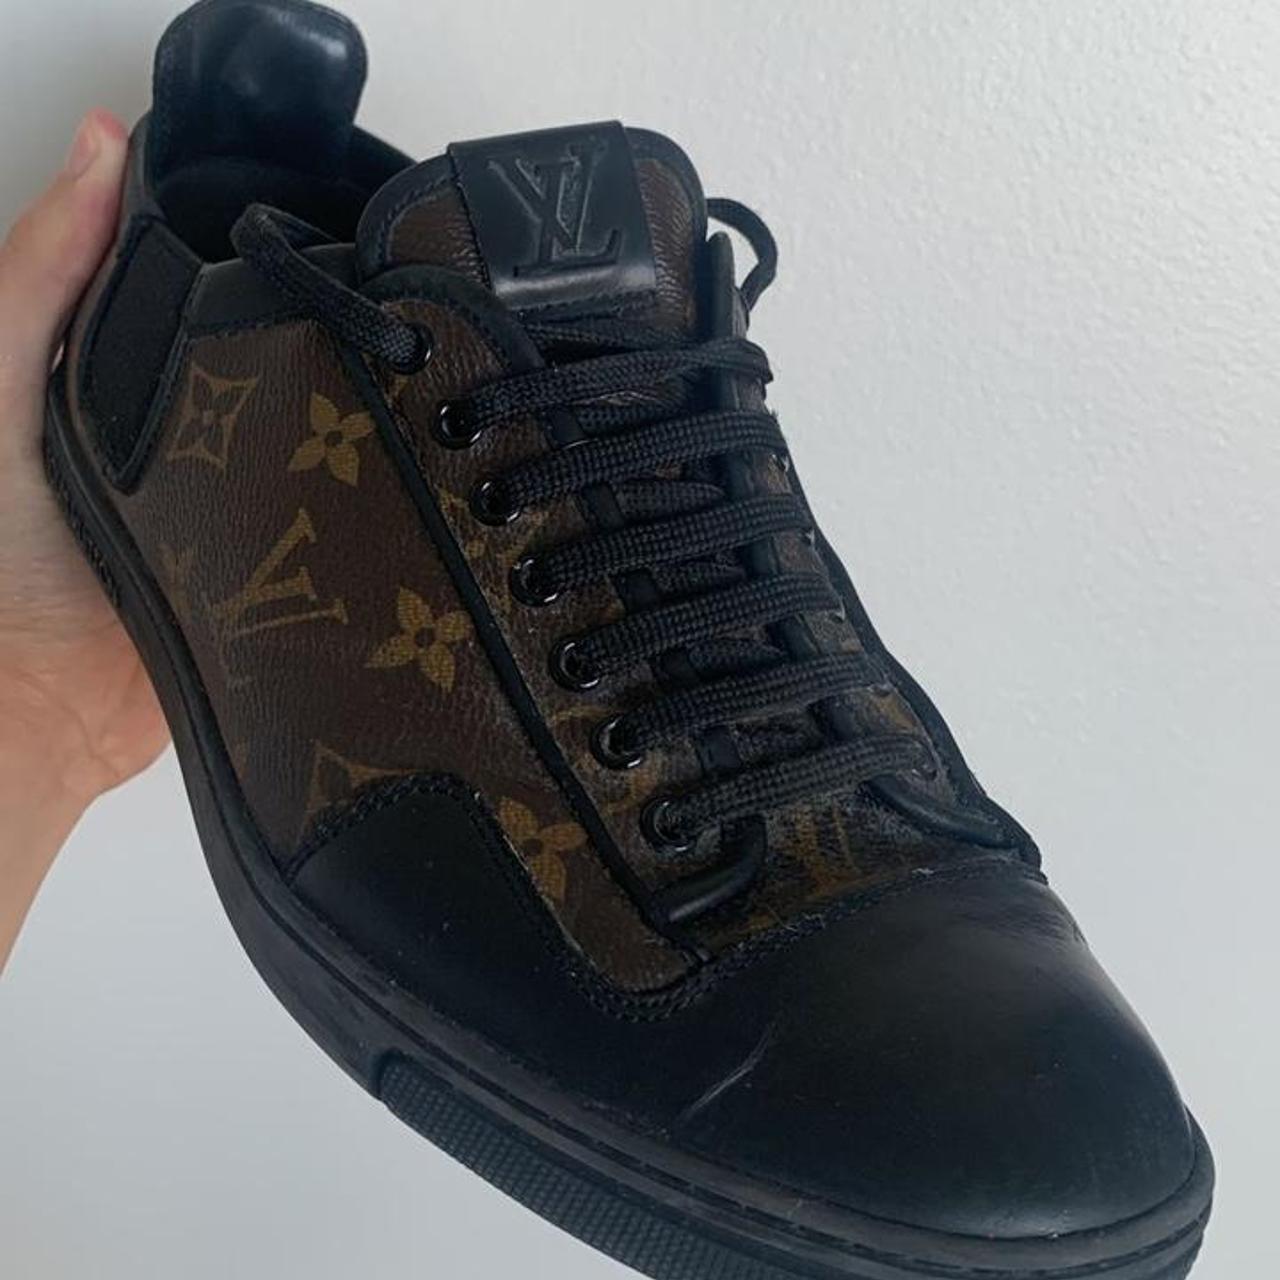 Louis Vuitton Brown Monogram Canvas And Leather Slalom Low Top